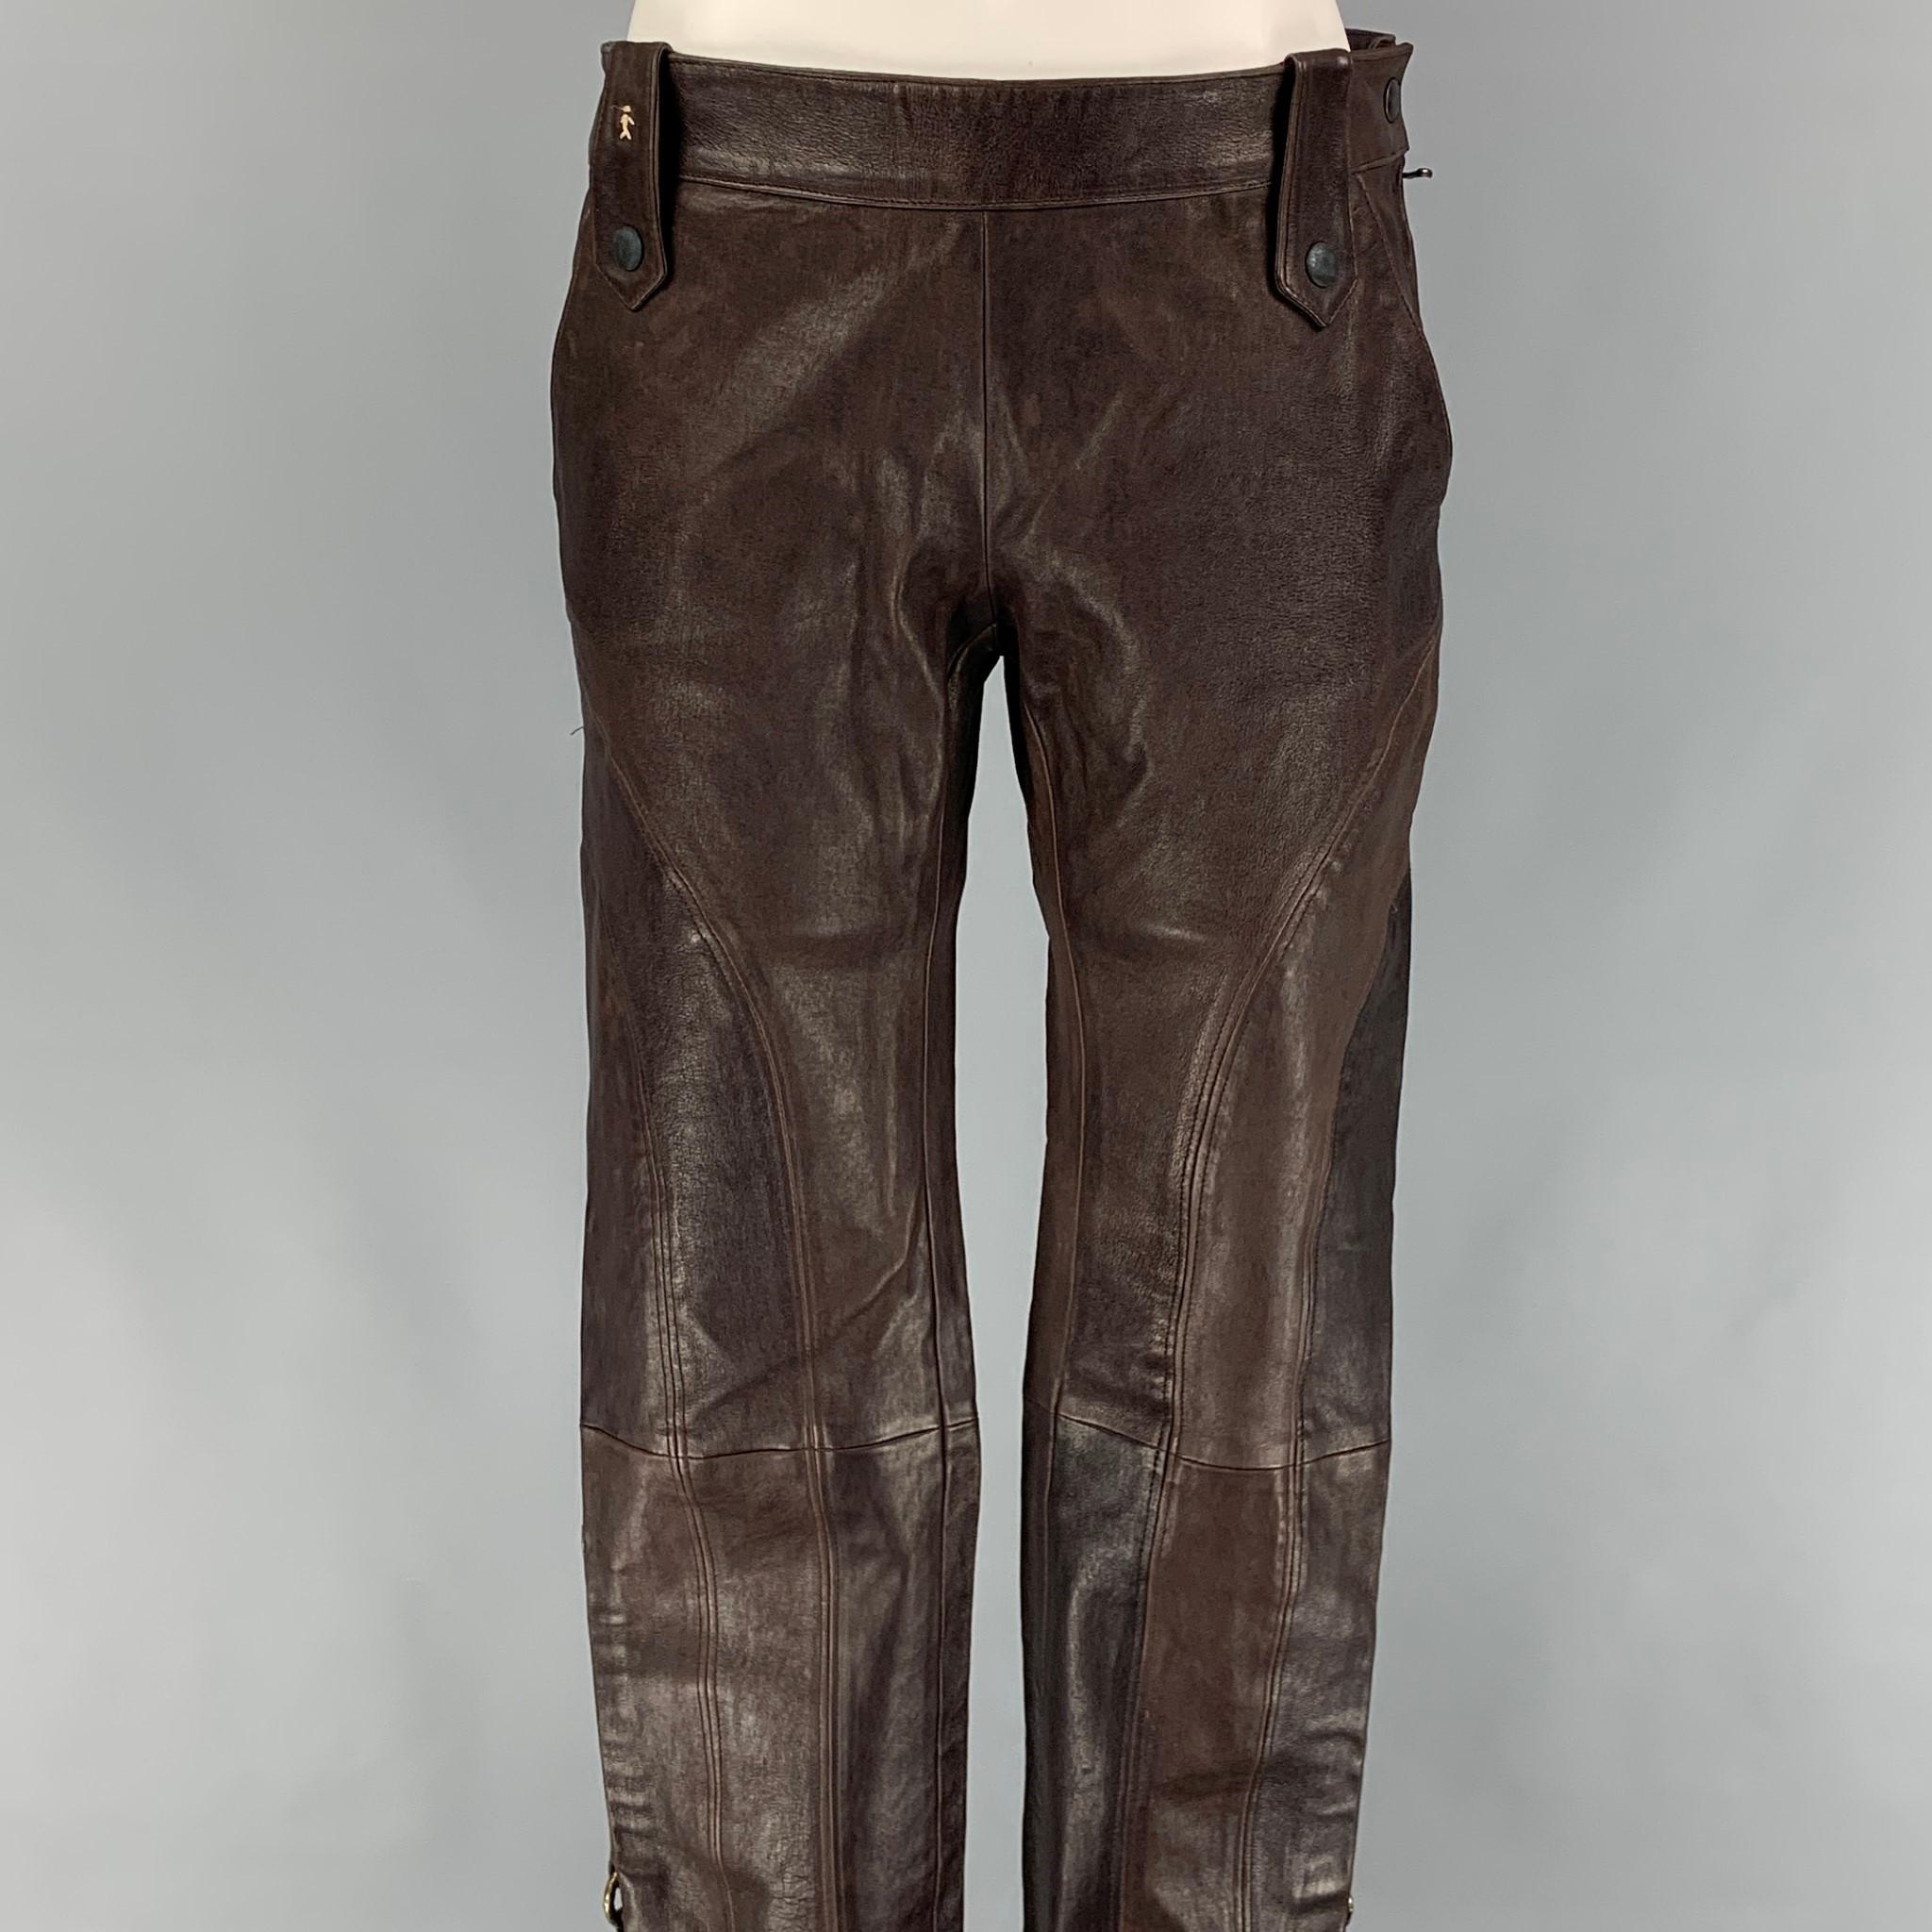 HENRY BEGUELIN dress pants comes in a brown leather featuring top stitching, snap button details, leg strap details, and a side zipper closure. Made in Italy. 

Very Good Pre-Owned Condition.
Marked: 42

Measurements:

Waist: 30 in.
Rise: 8.5